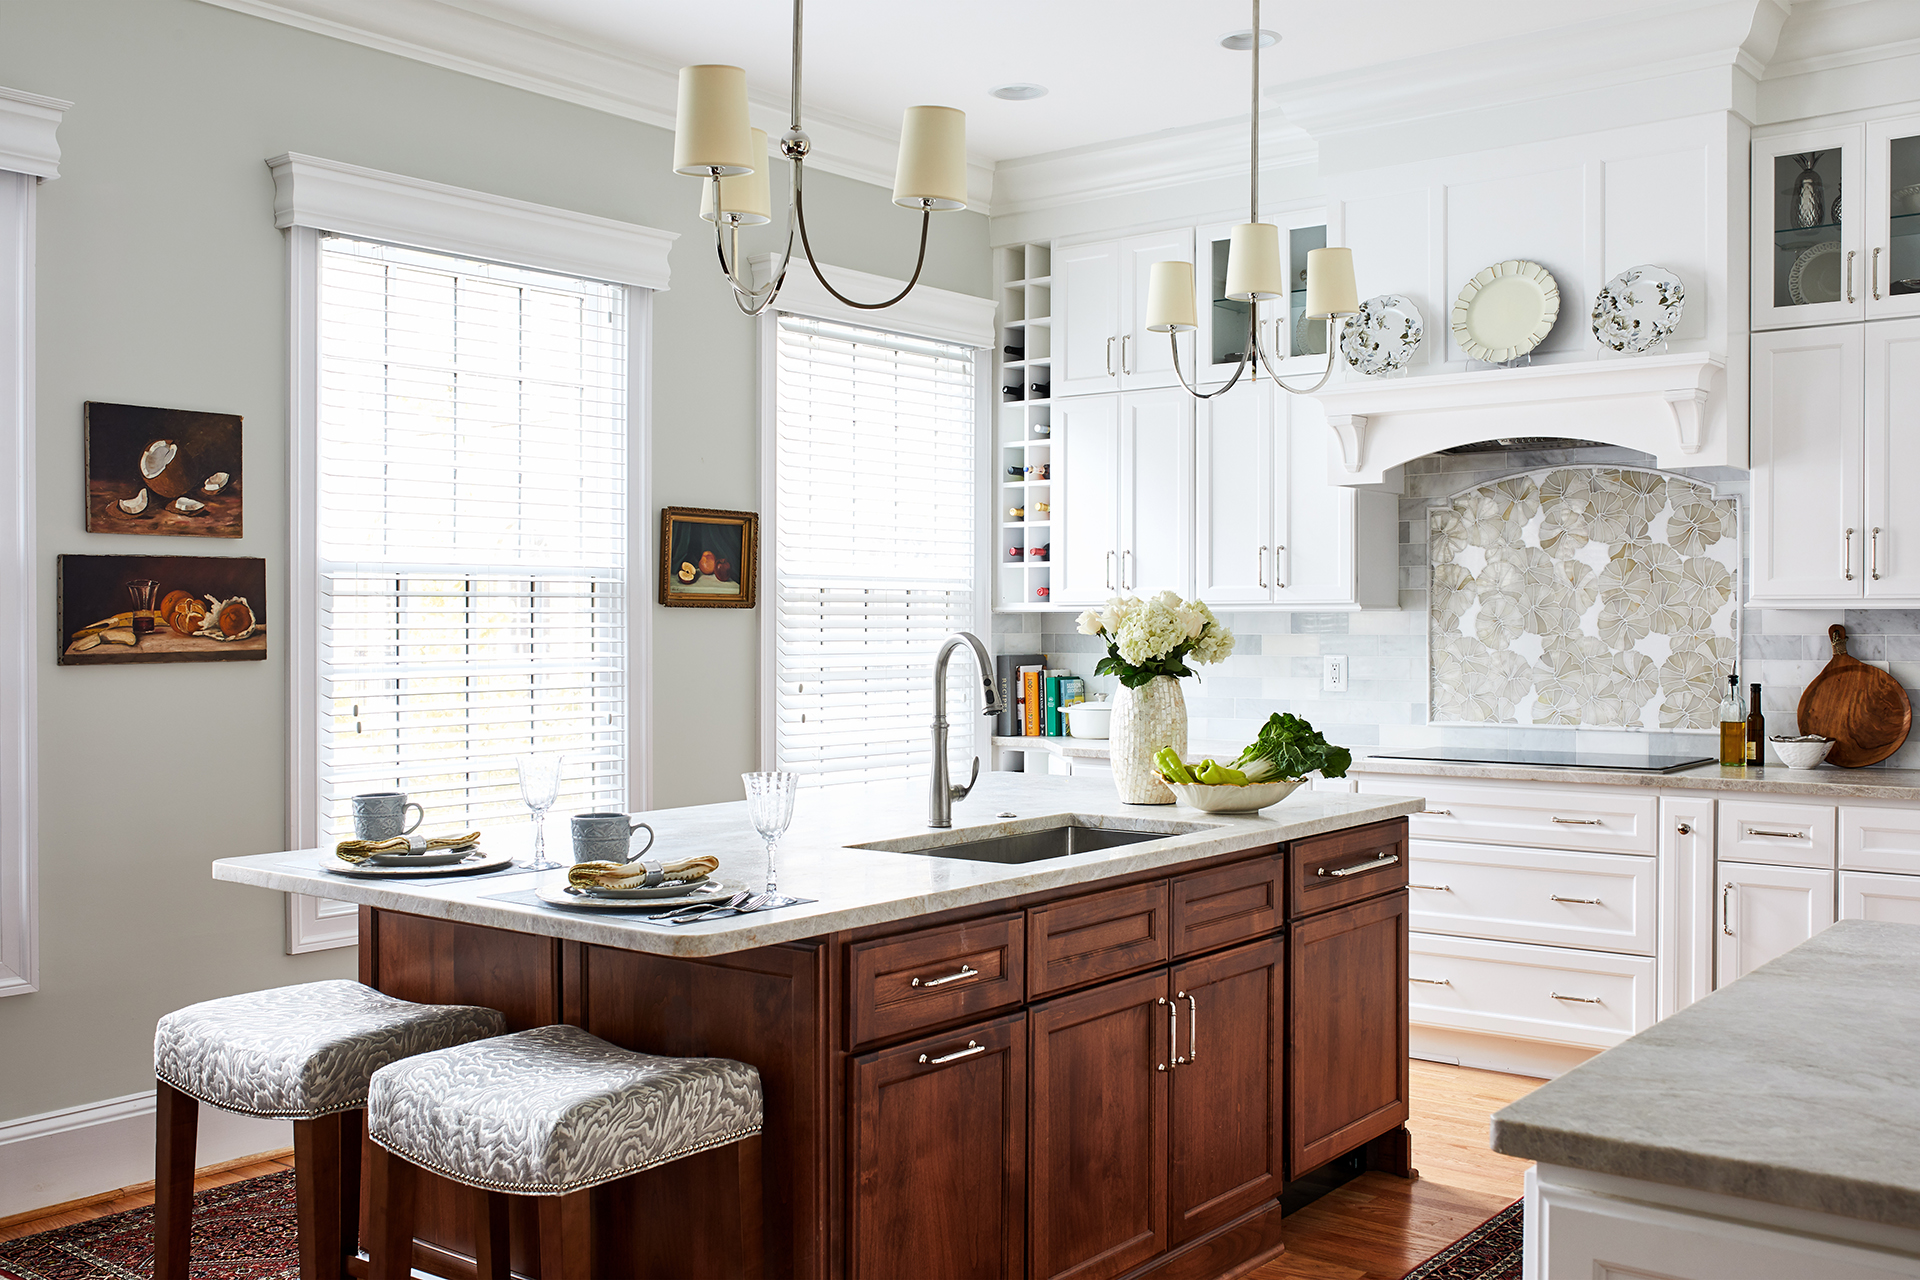 White Painted Kitchen With Contrasting, White Kitchen Cabinets With Colored Island